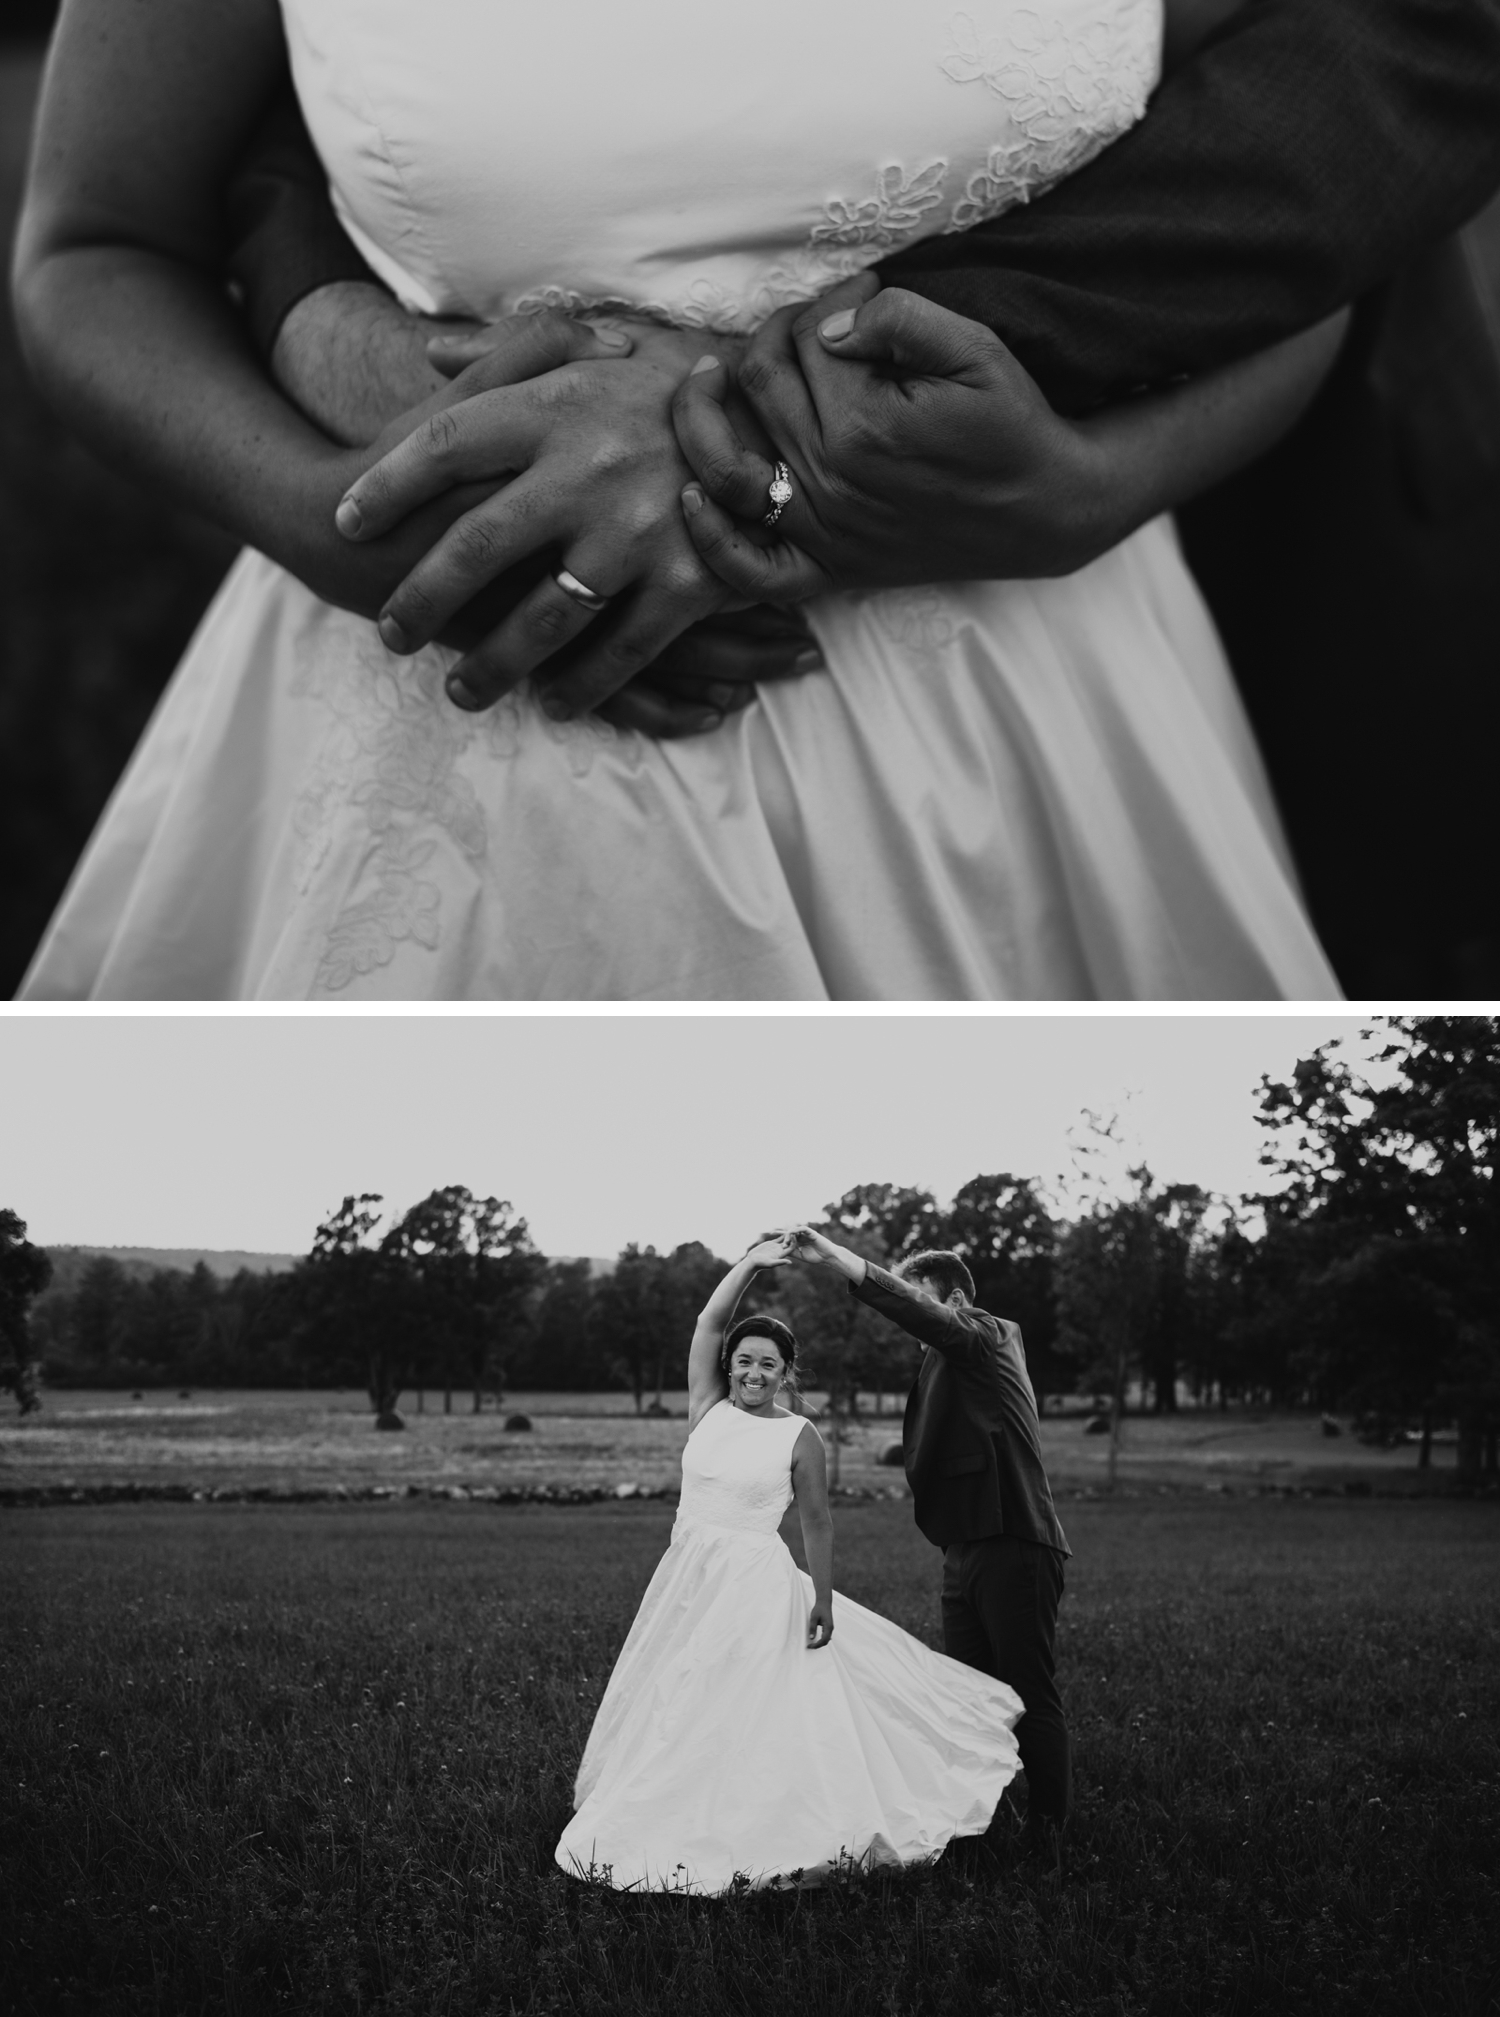 Black and white couples portrait at sunset